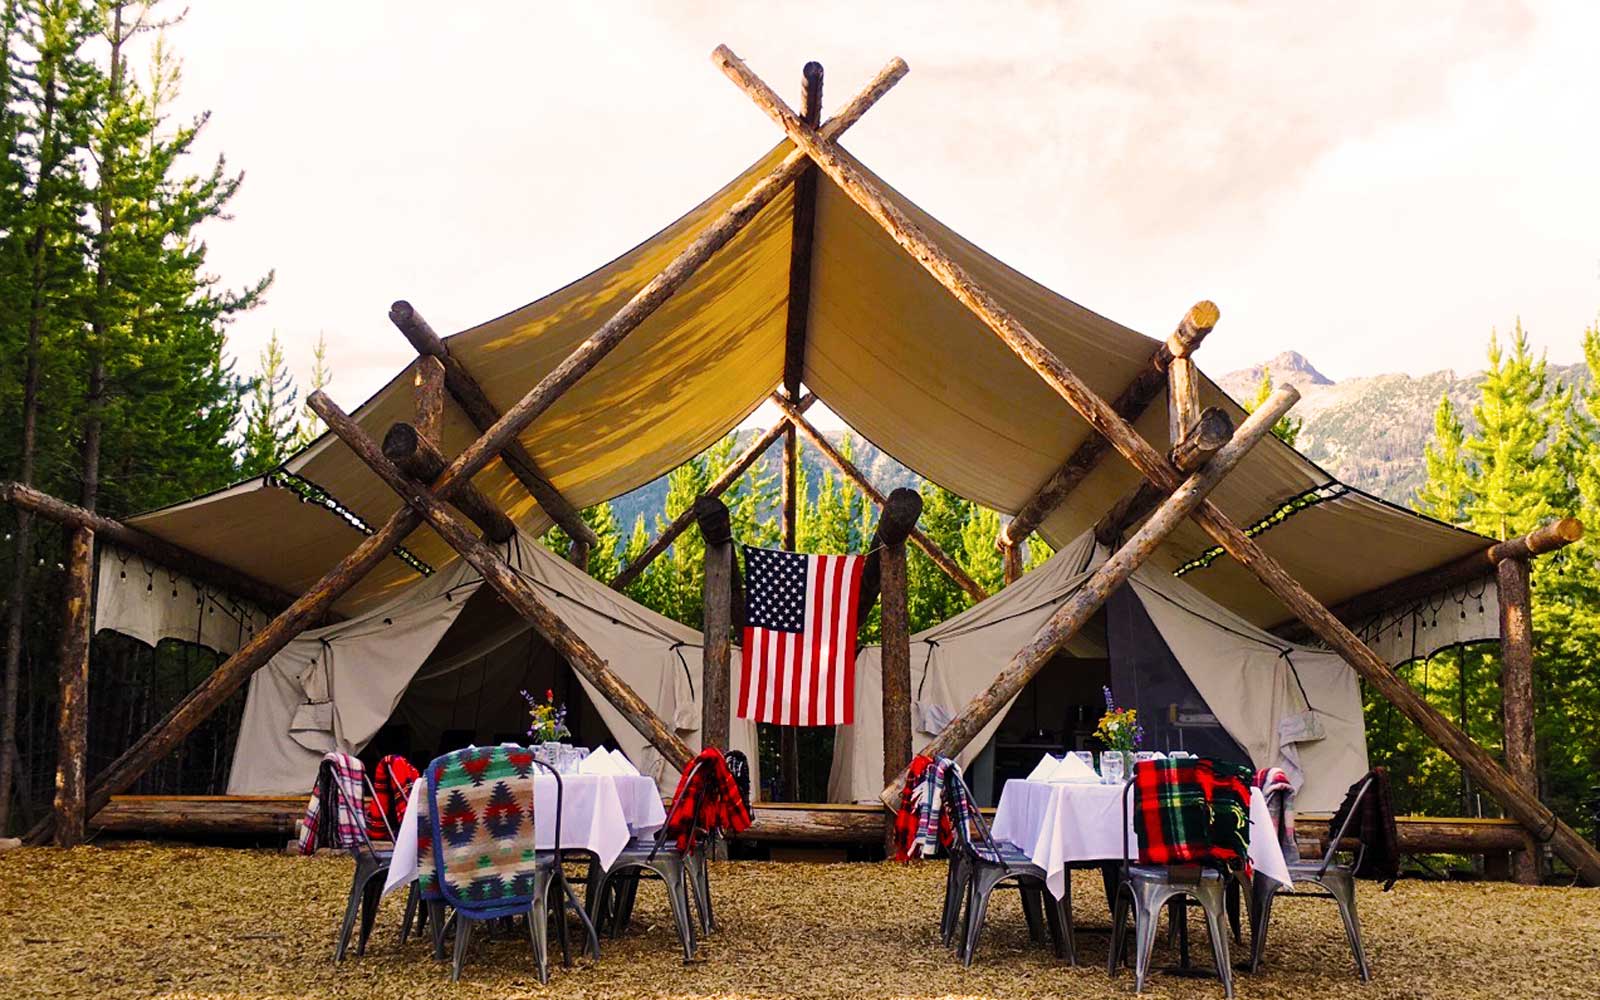 Go Glamping near Yellowstone with Lakeside Teepees and a Personal Chef